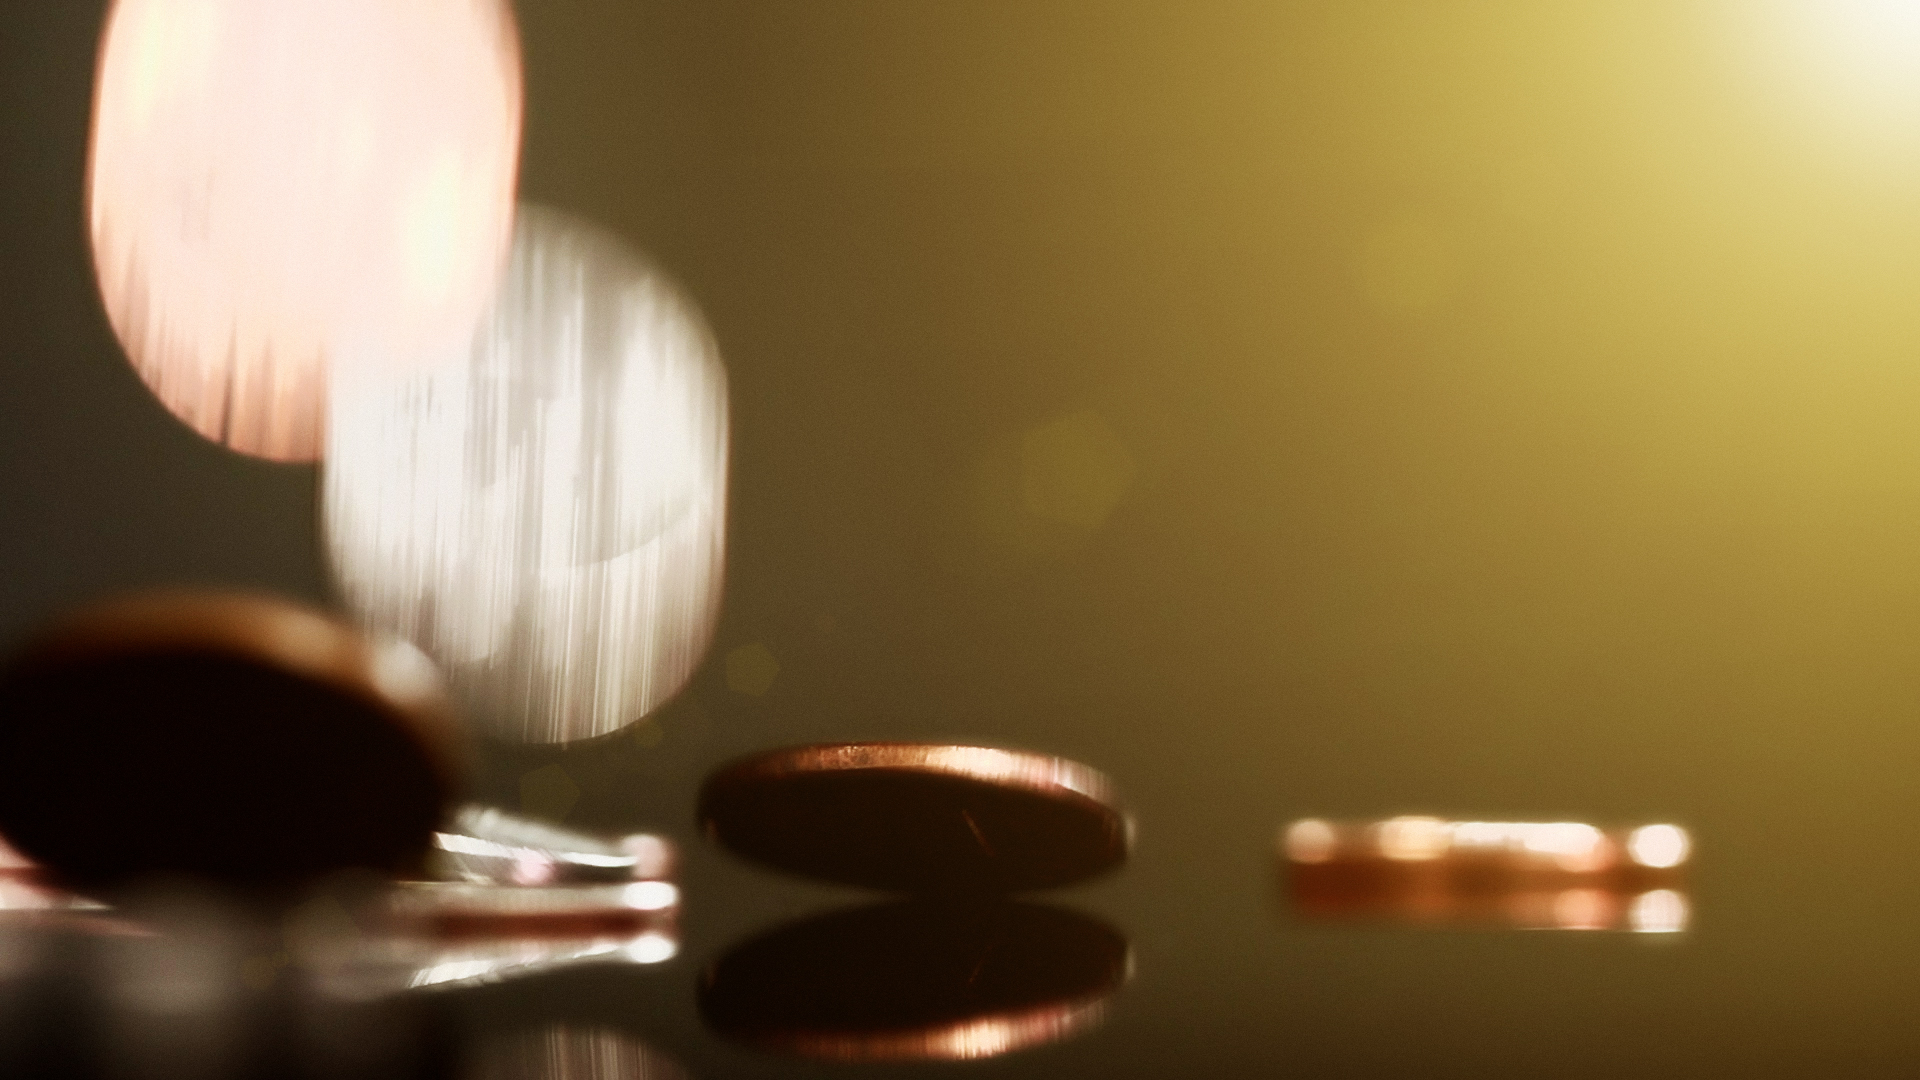 Silver and copper coins falling onto a reflective surface, showing  motion blur and lens flare. Copy space on the greeny-gold background.